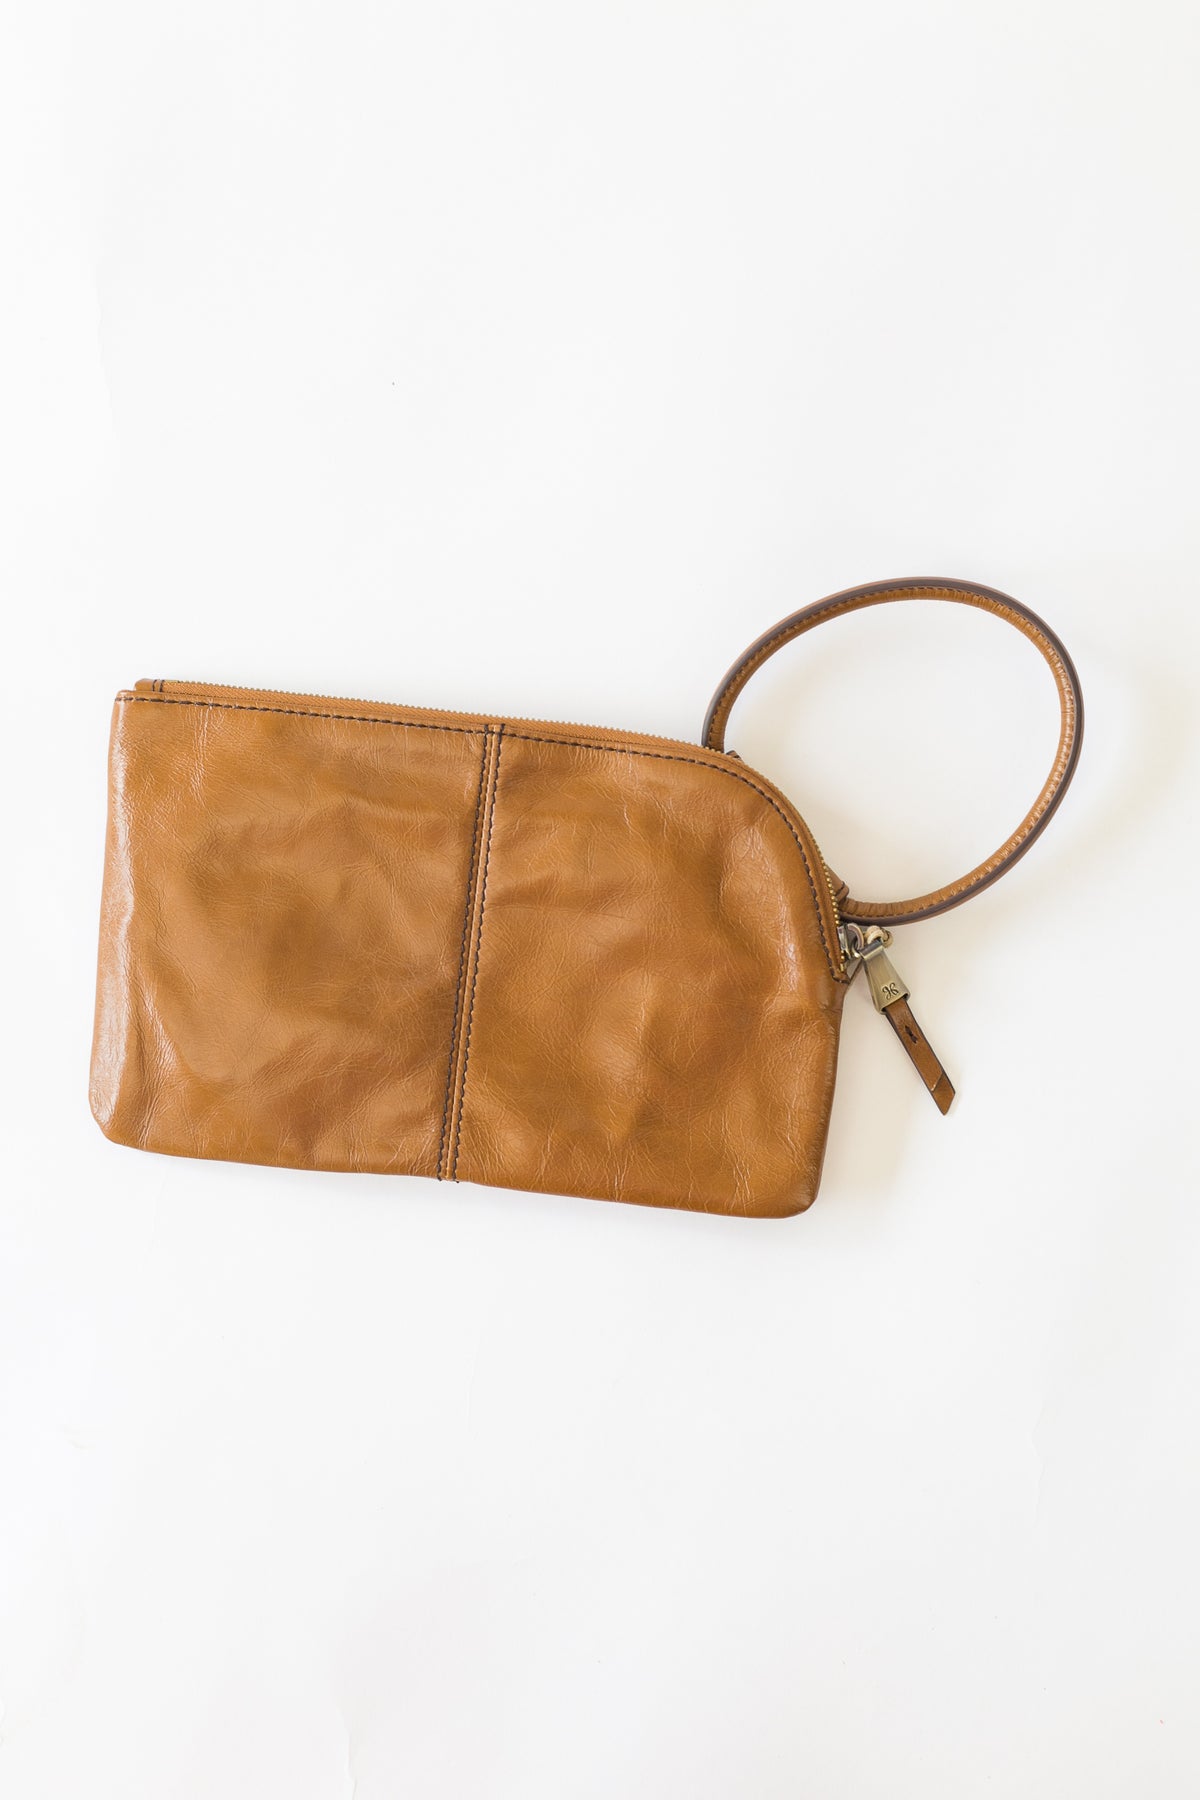 Sable Clutch - Willow House Boutique